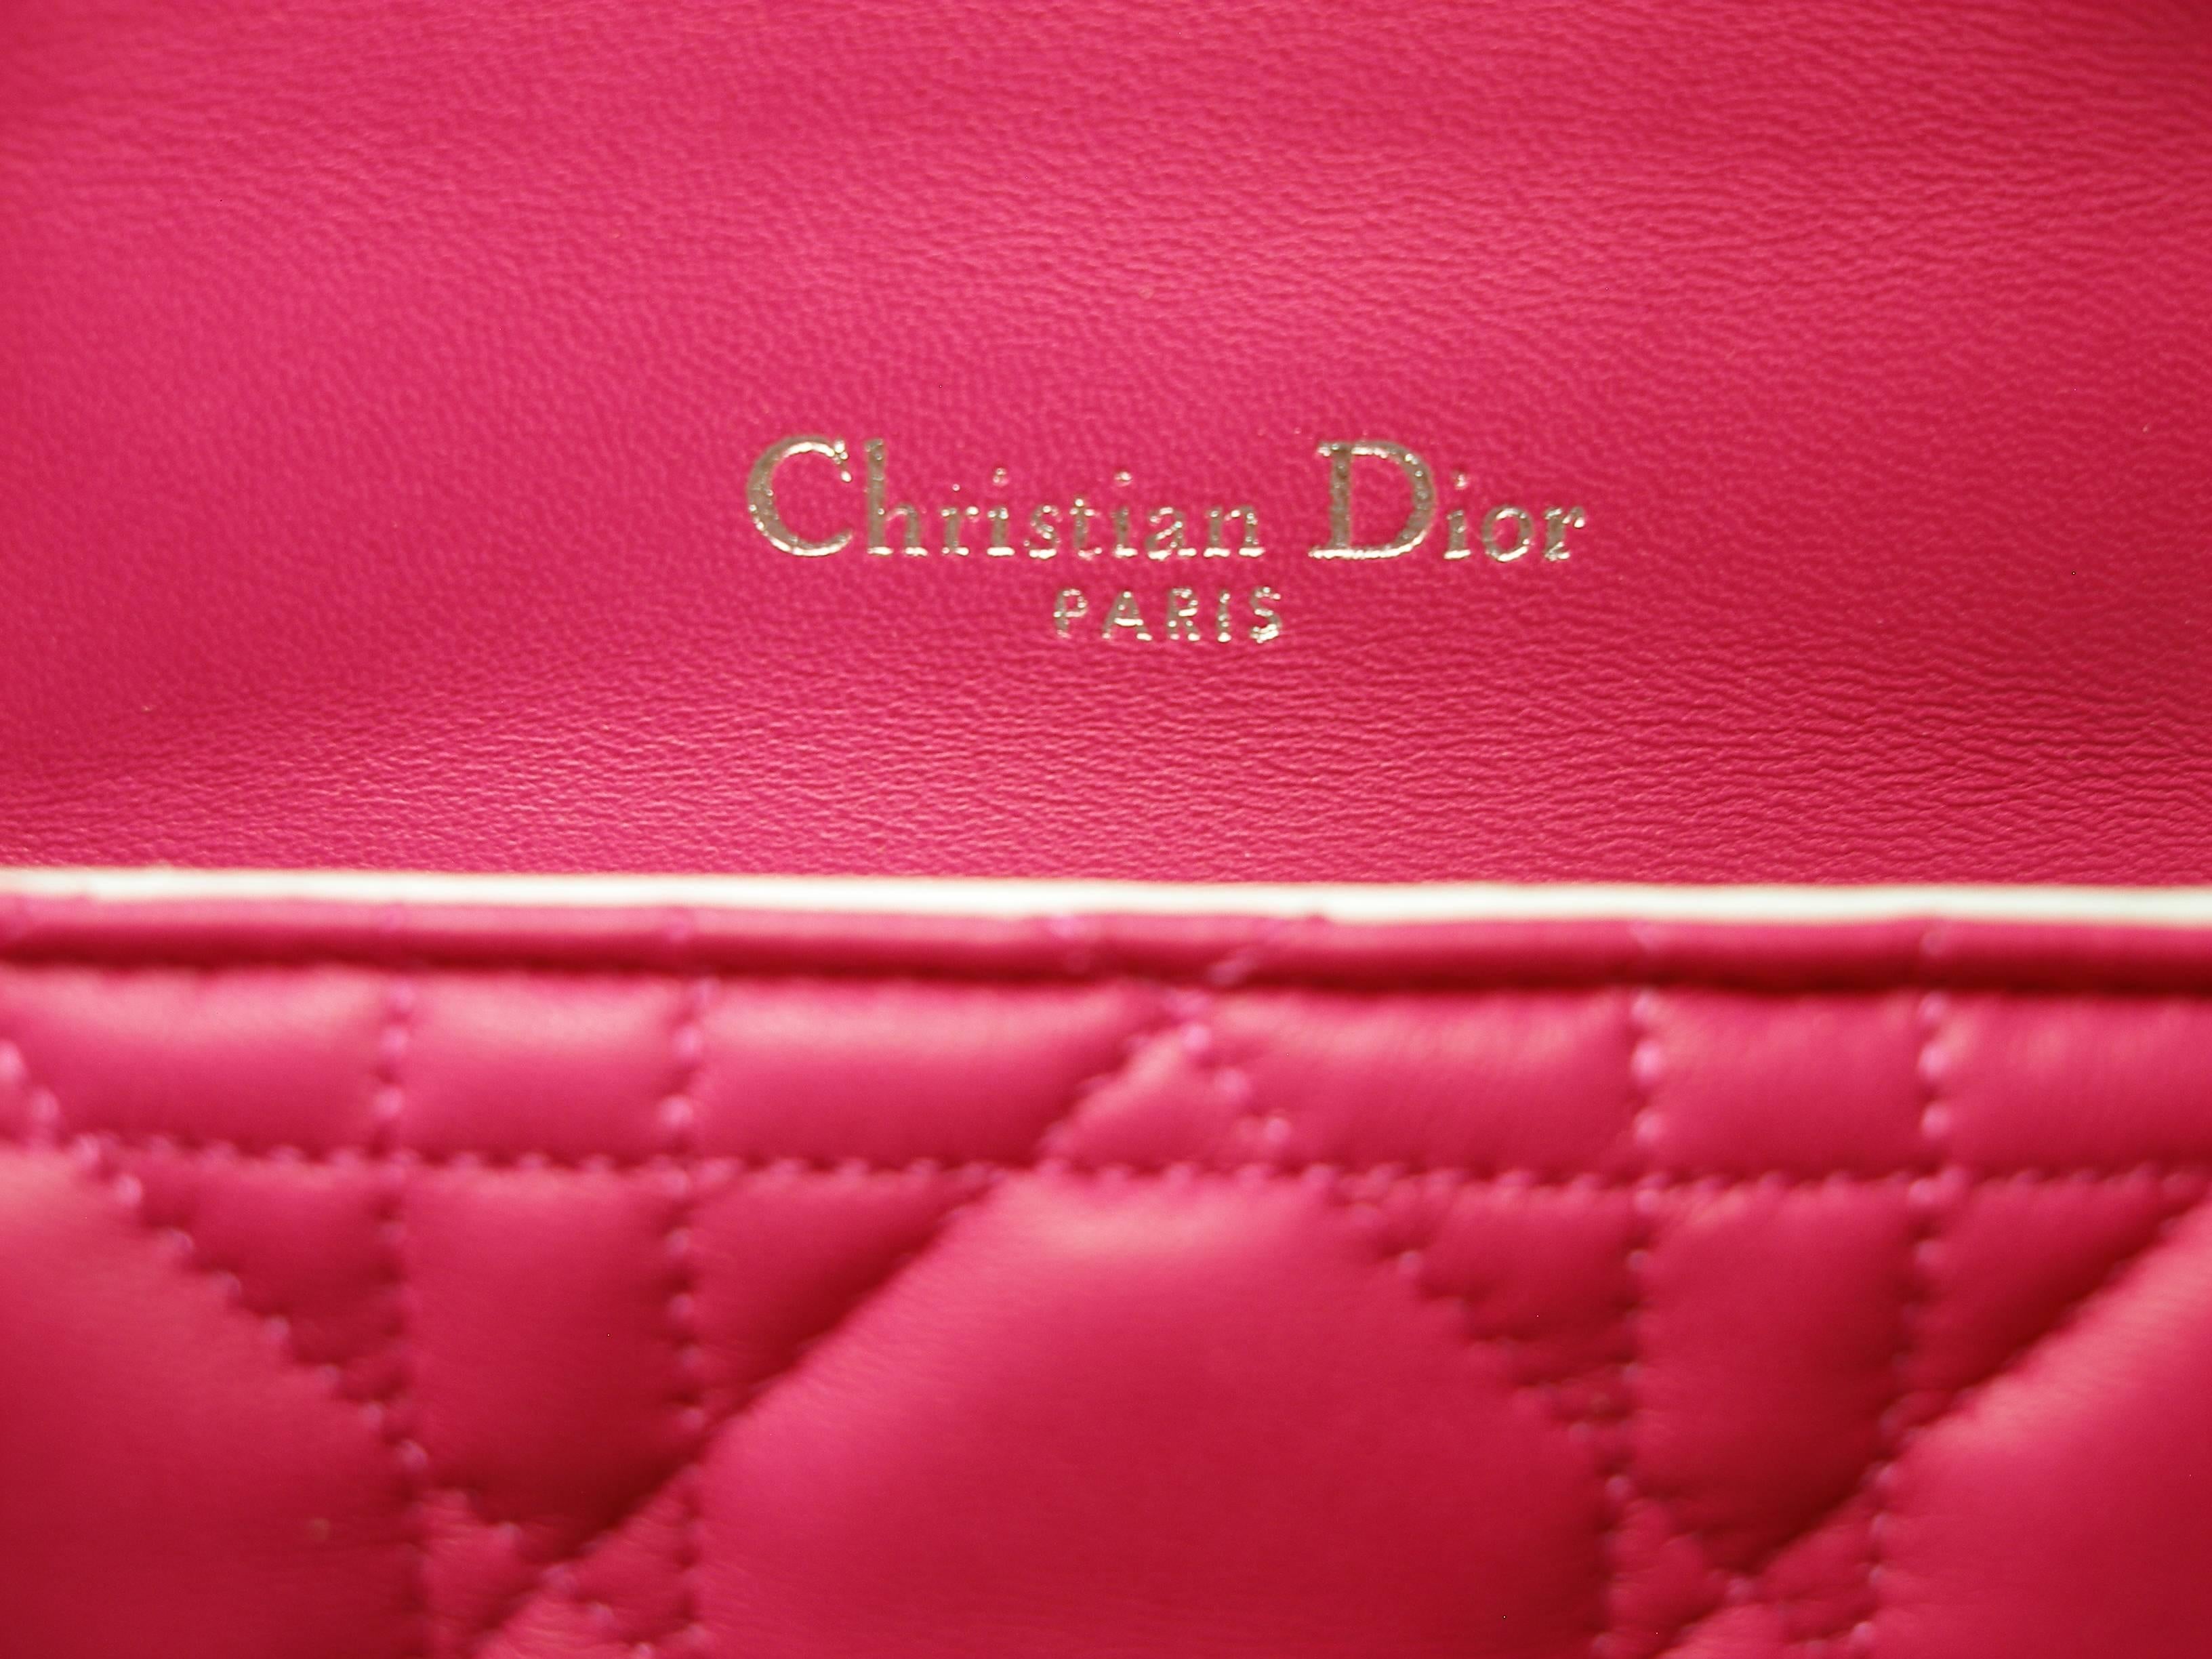 Women's Dior Miss Dior Bag pink cannage Leather Small  Size / BRAND NEW